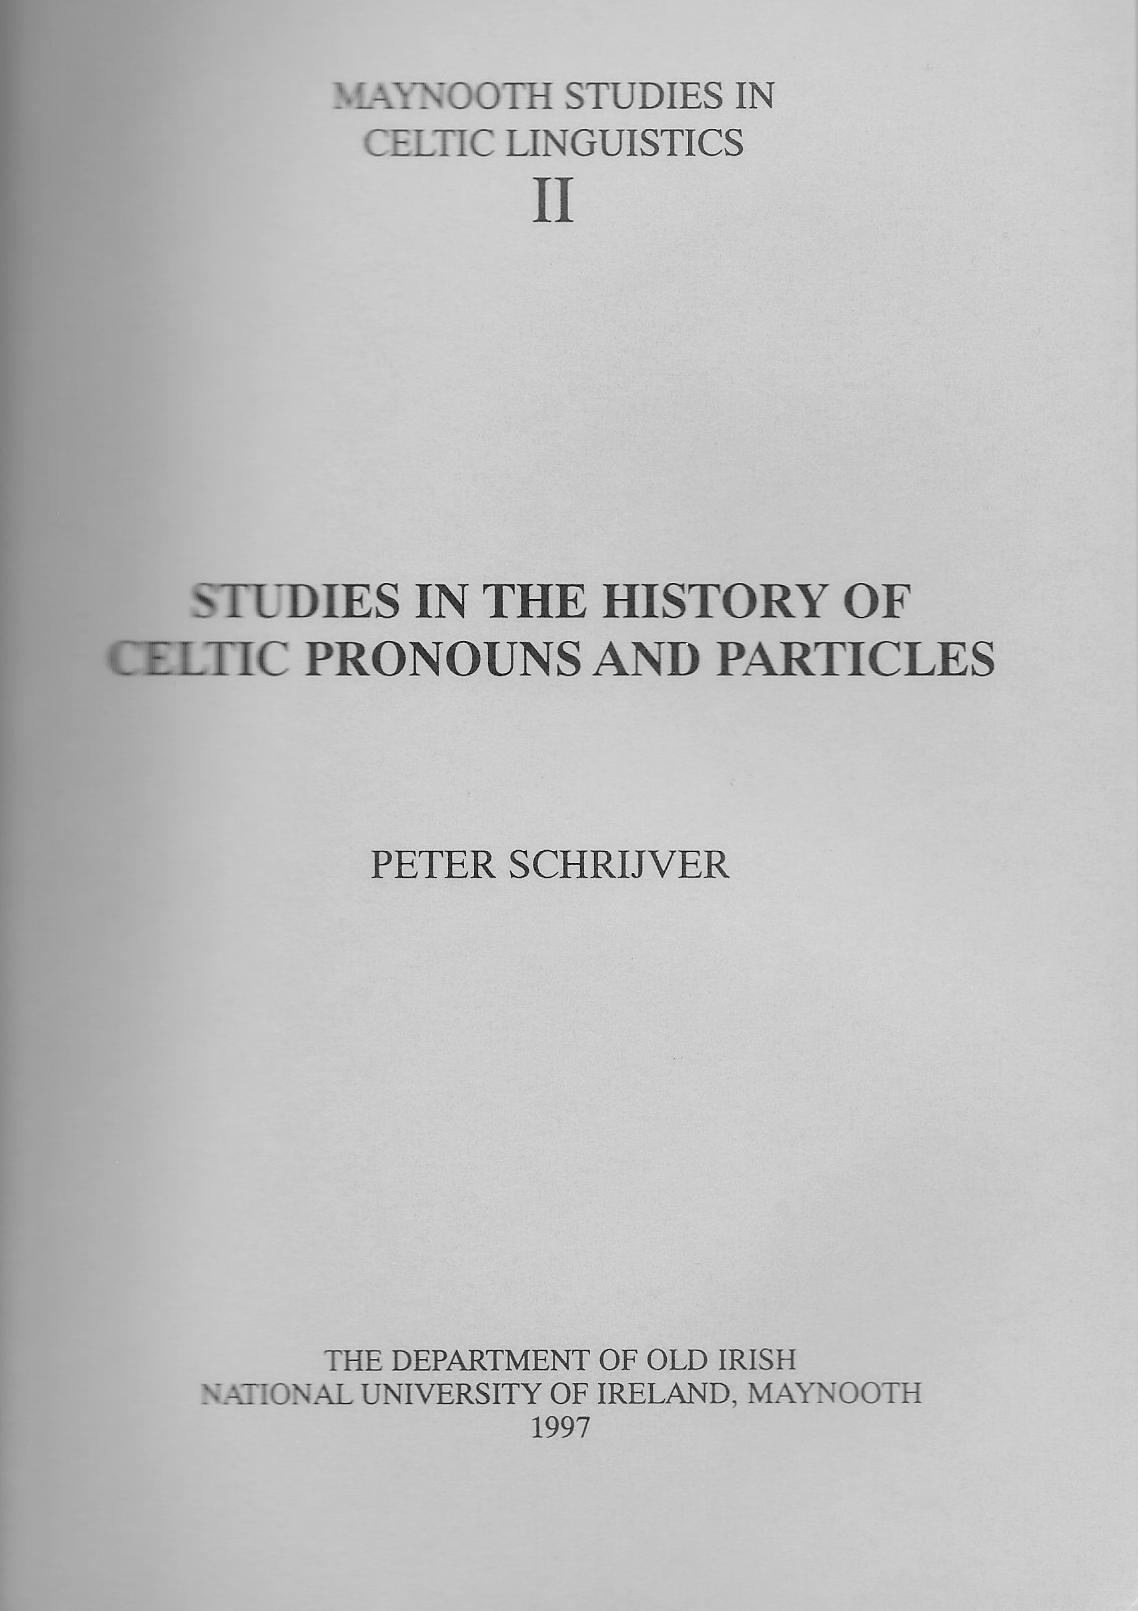 Studies in the History of Celtic Pronouns and Particles ( Maynooth Studies in Celtic Linguistics II)